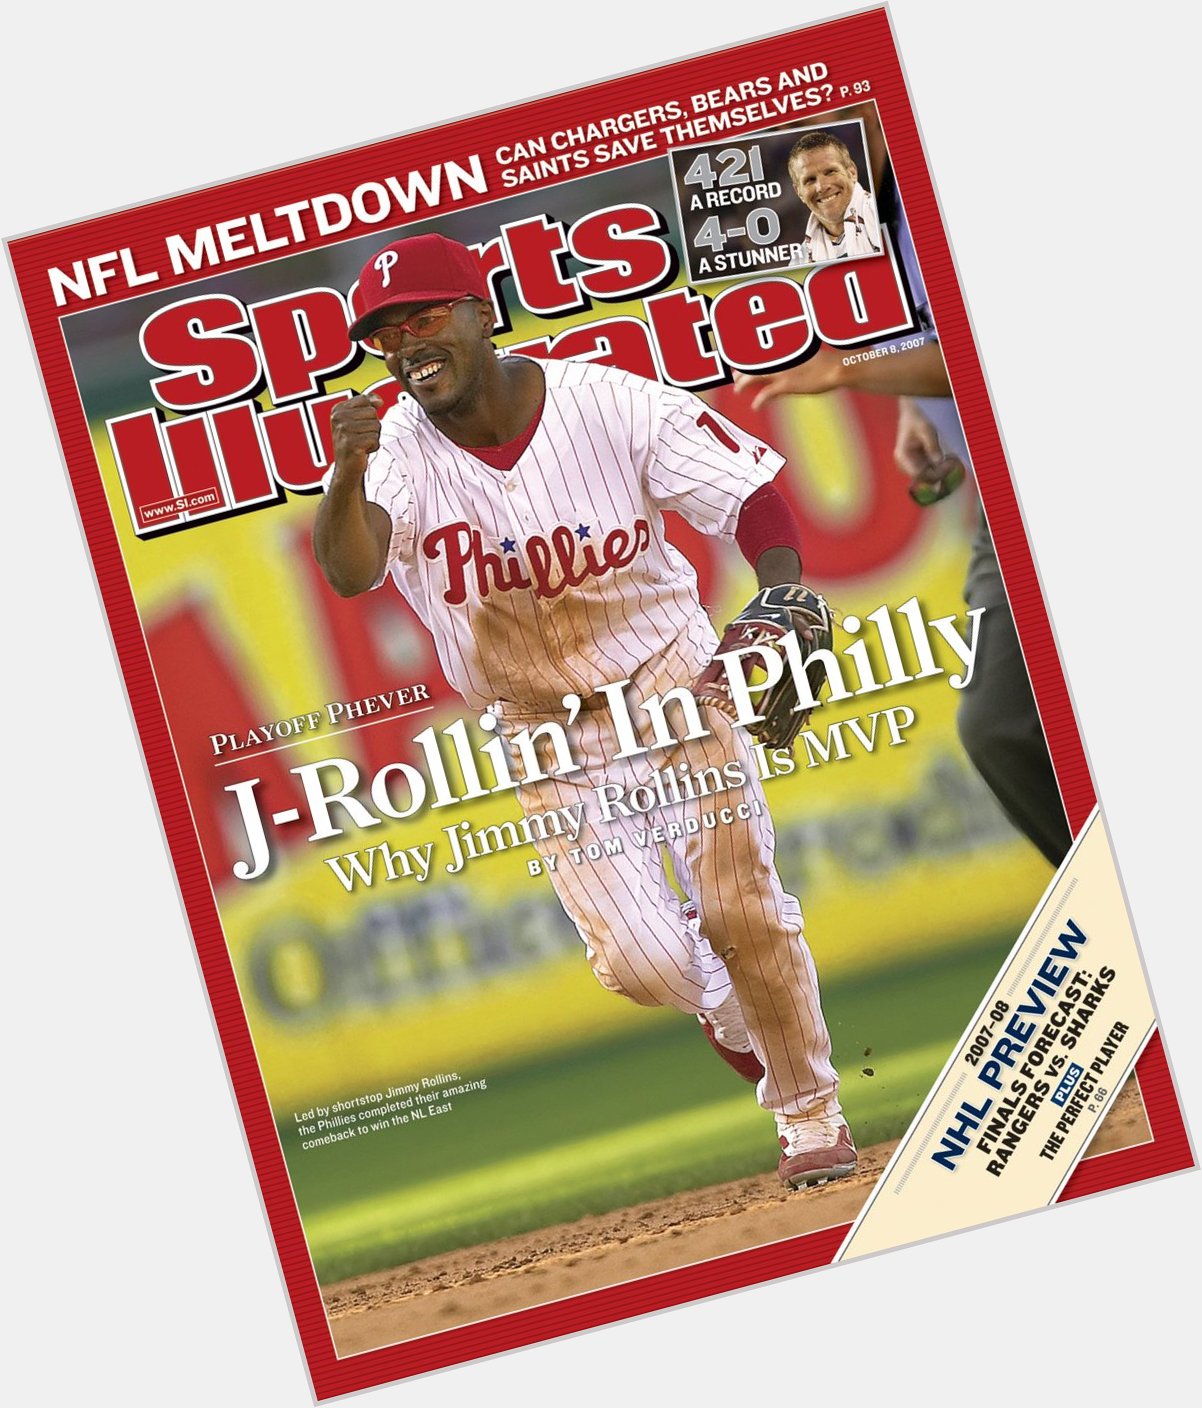 Happy 37th birthday Jimmy Rollins, thank you for the good times. 